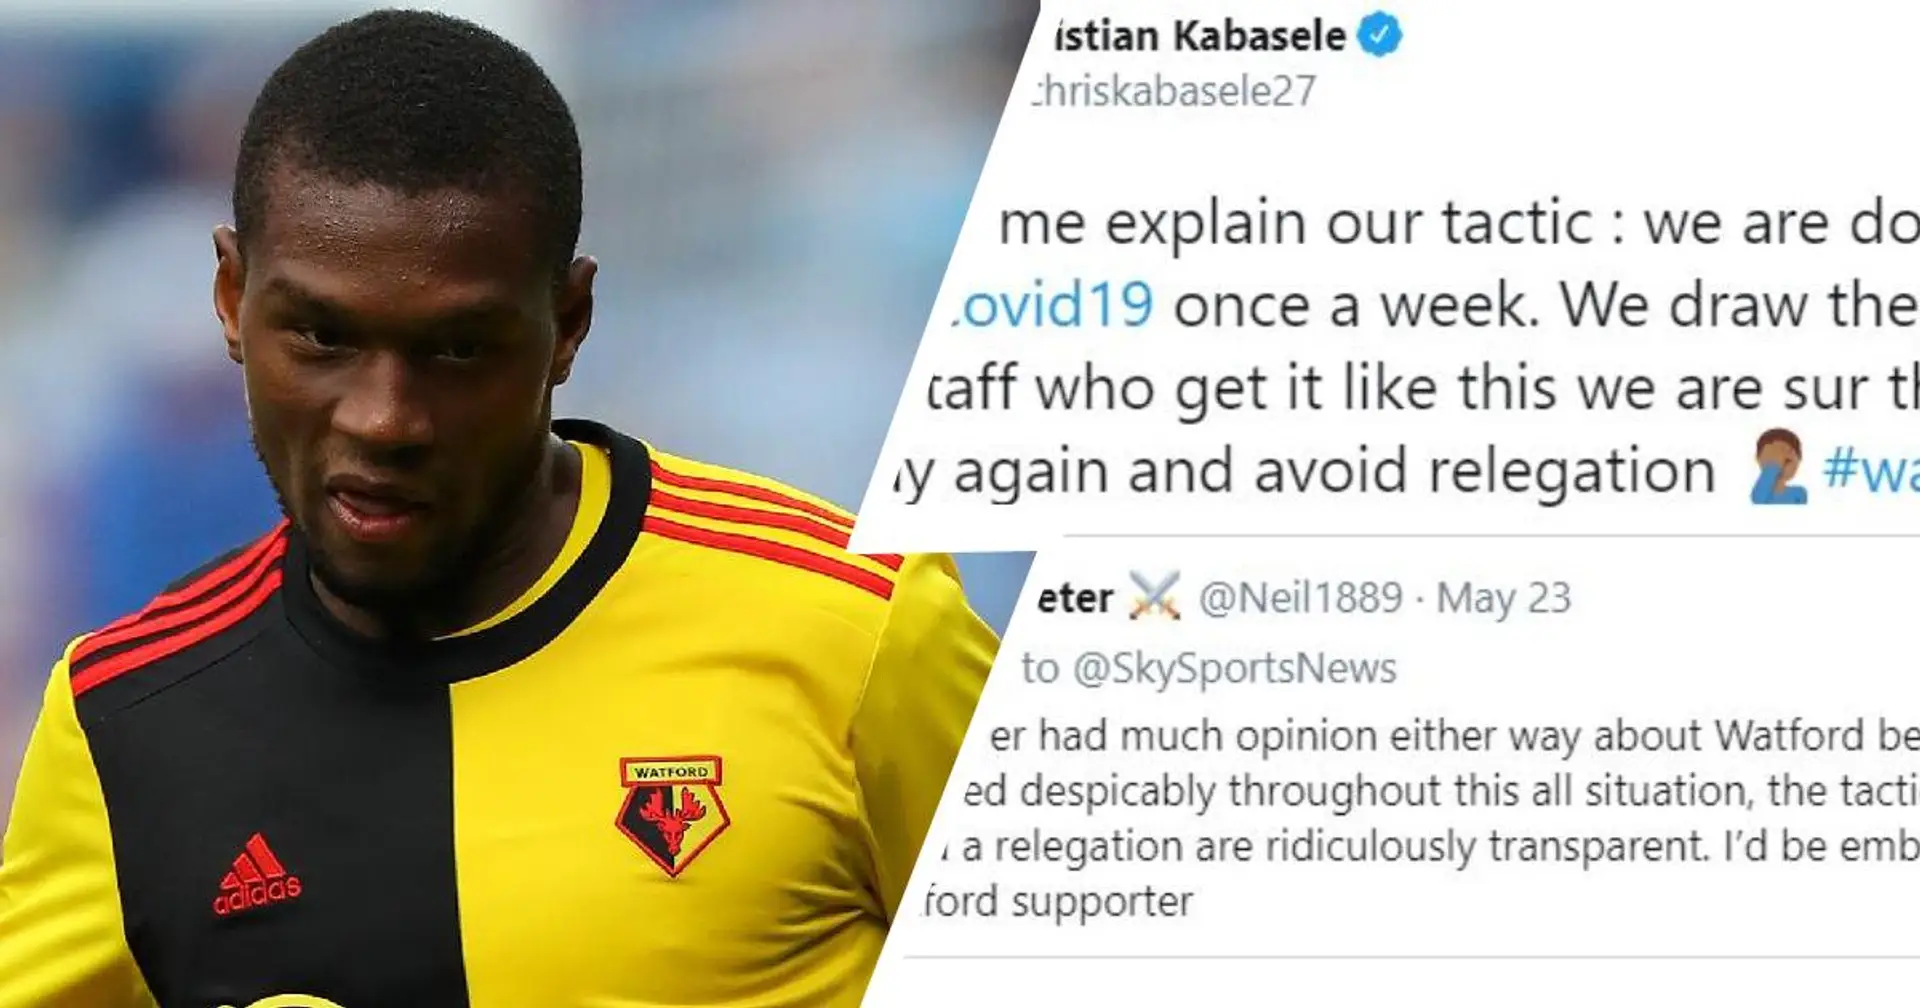 Christian Kabasele slams Twitter user who suggests Watford are using 'tactics' to avoid relegation